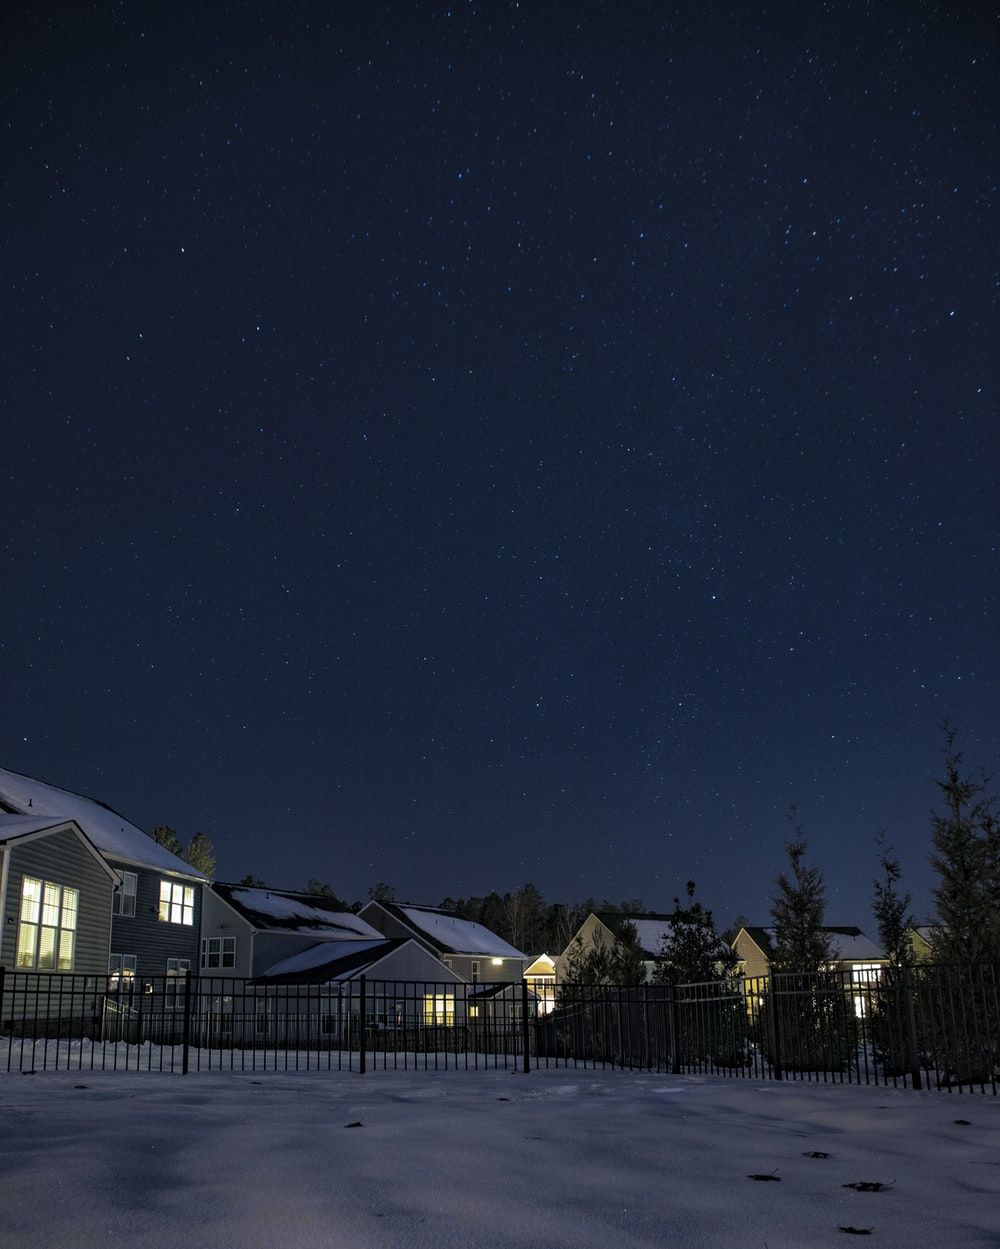 Winter Night Picture. Download Free Image